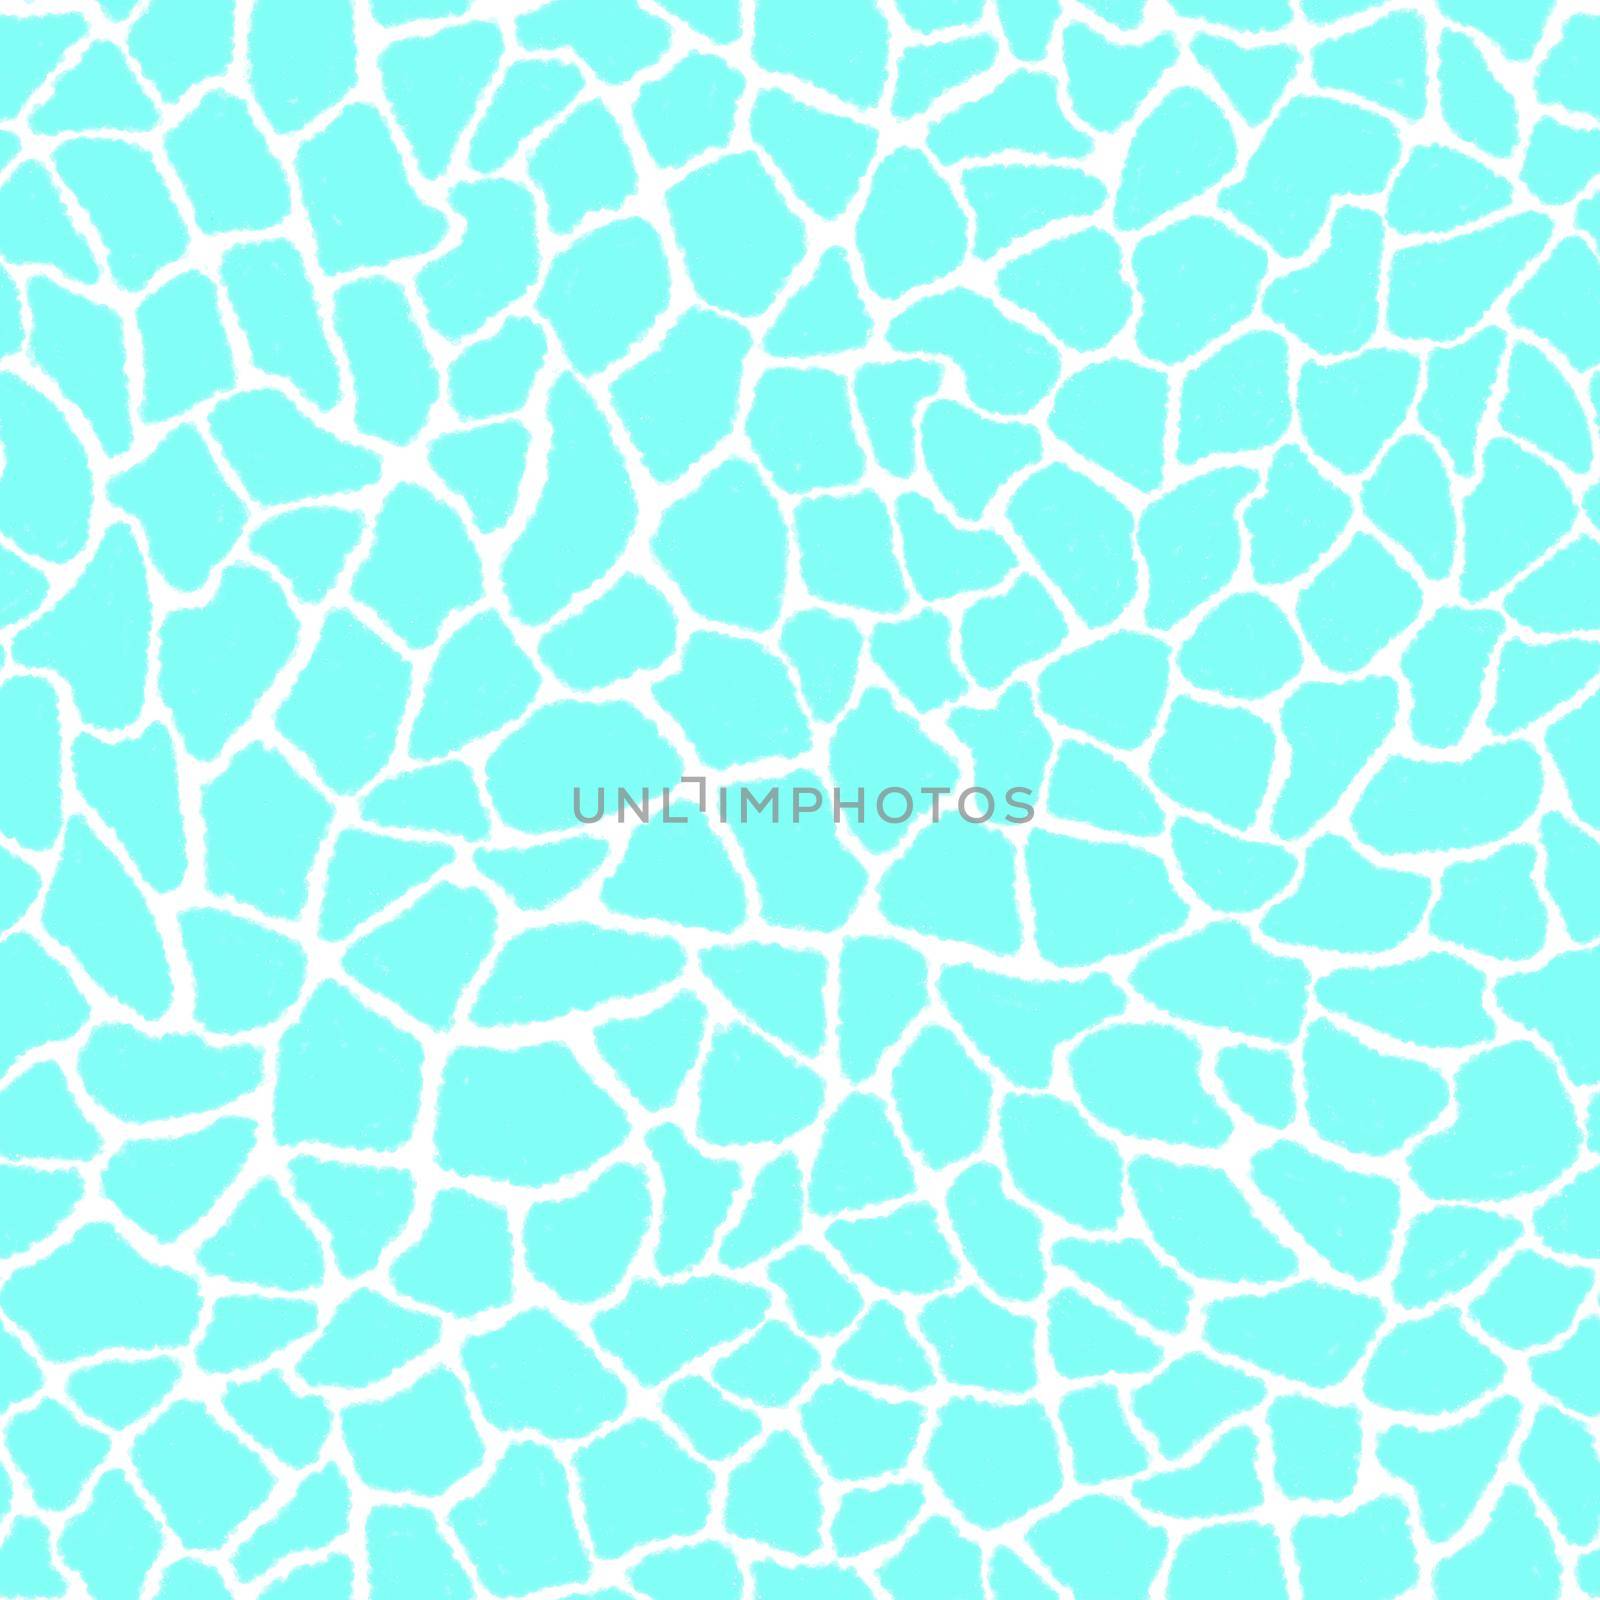 Giraffe skin color seamless pattern with fashion animal print for continuous replicate. Chaotic mosaic turquoise pieces on white background. Wrapping paper, funny textile fabric print,design,decor by Angelsmoon